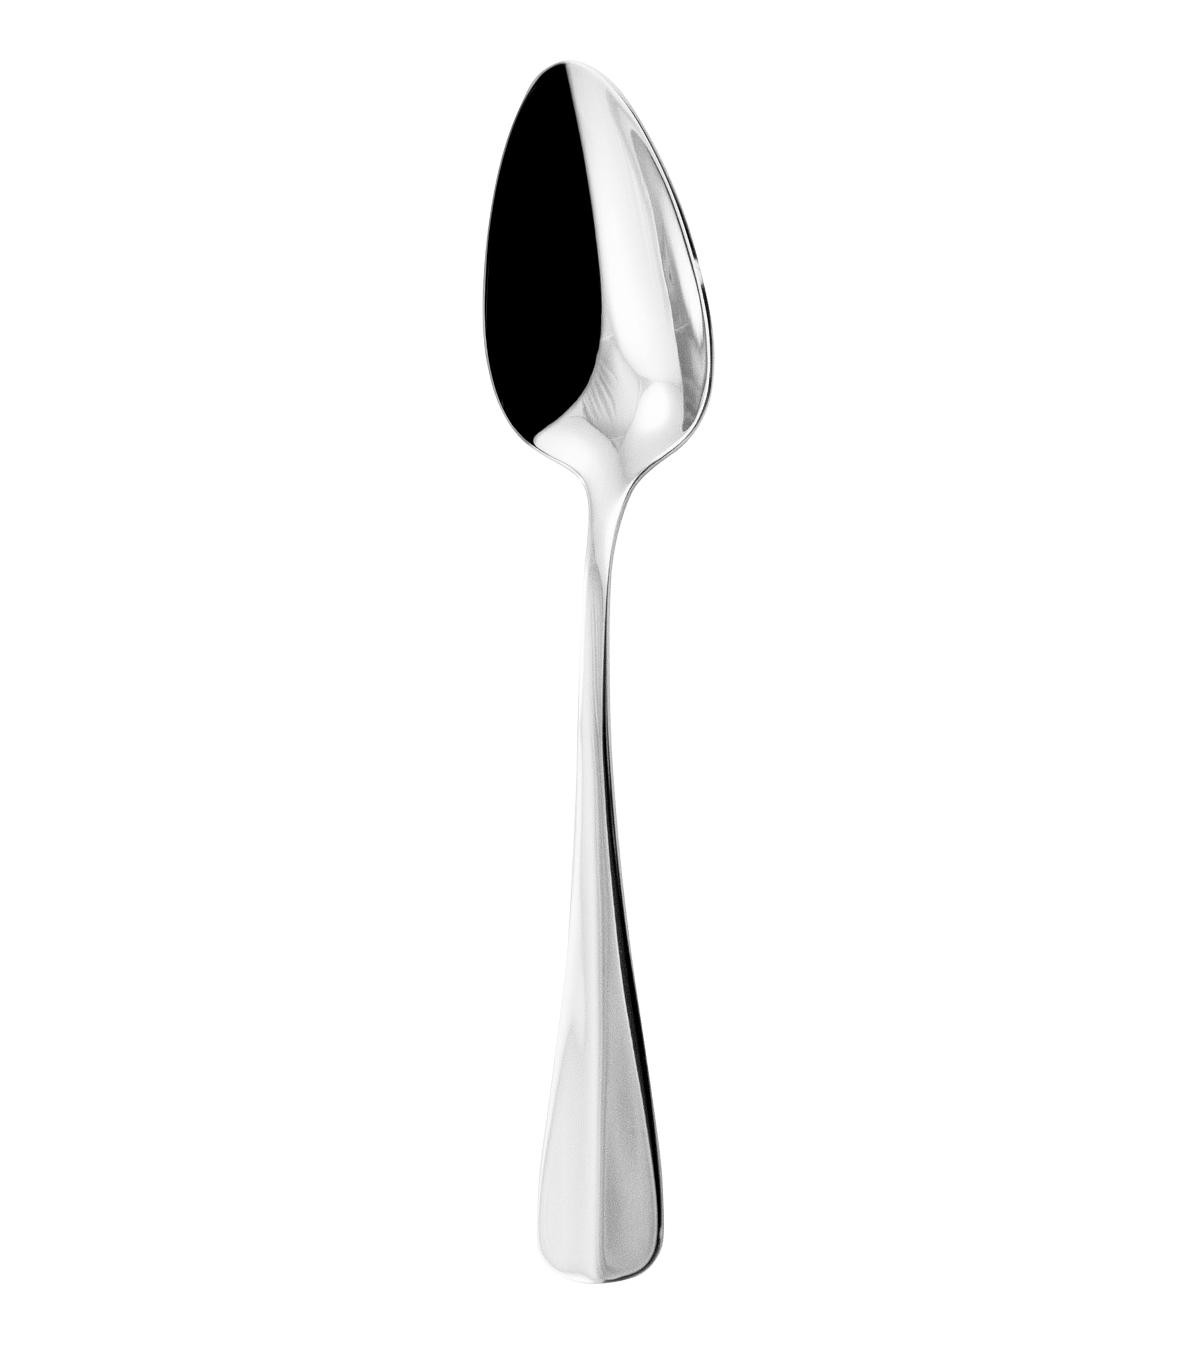 Coffee Scoop, 1 and 2 Tablespoon, Stainless Steel, Mirror Finish